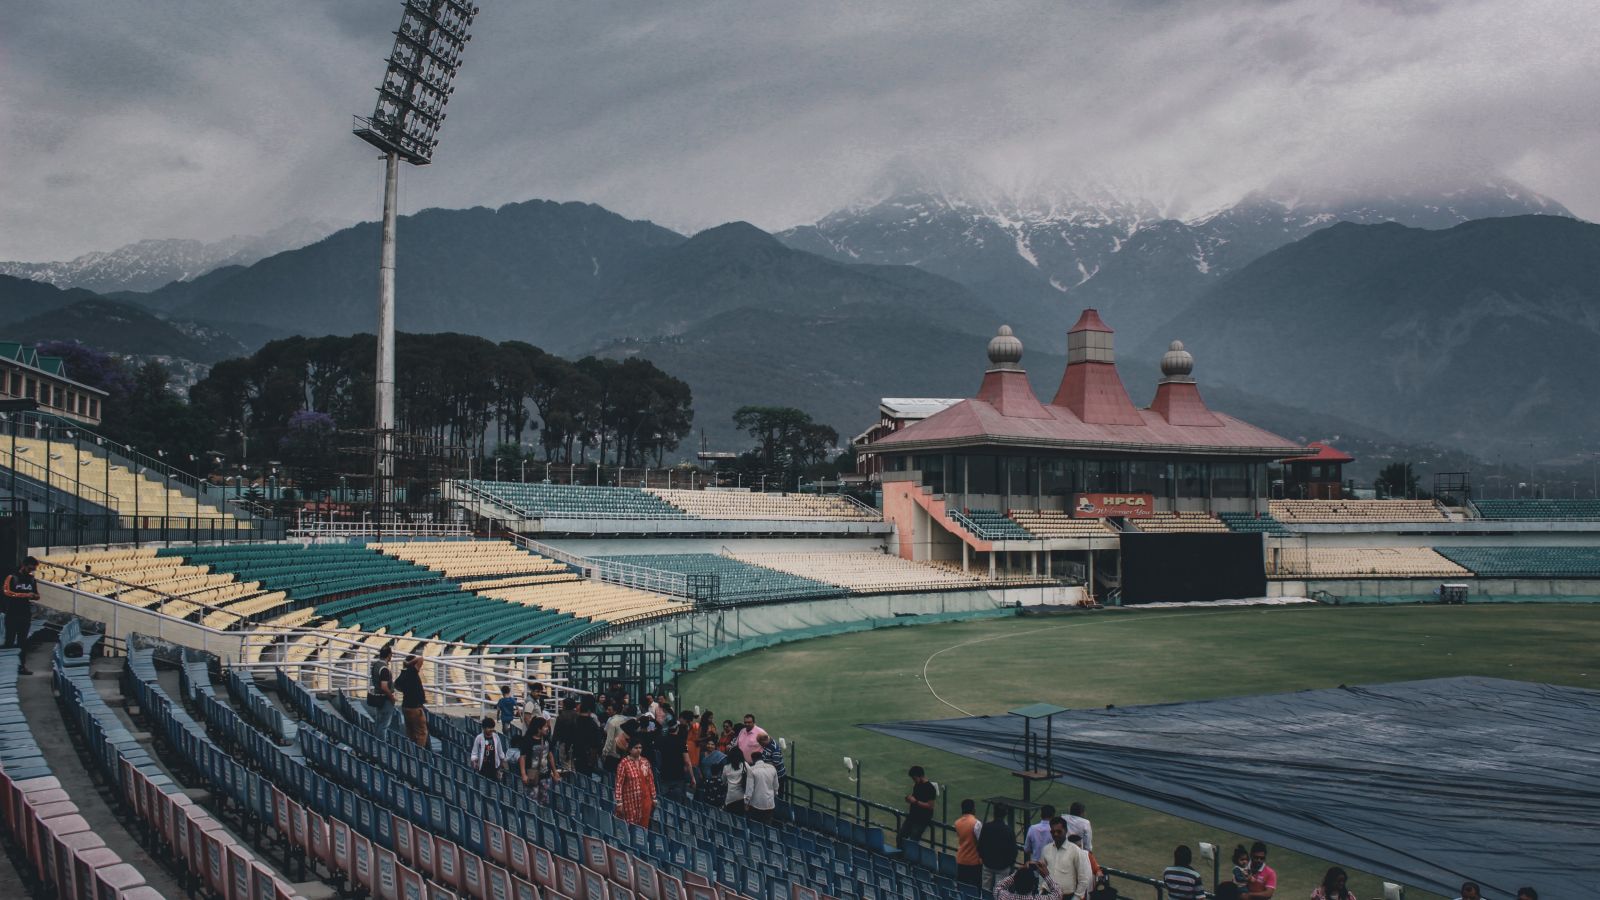 Image of Dharamshala Cricket Stadium on a cloudy day with the mountains in the backdrop